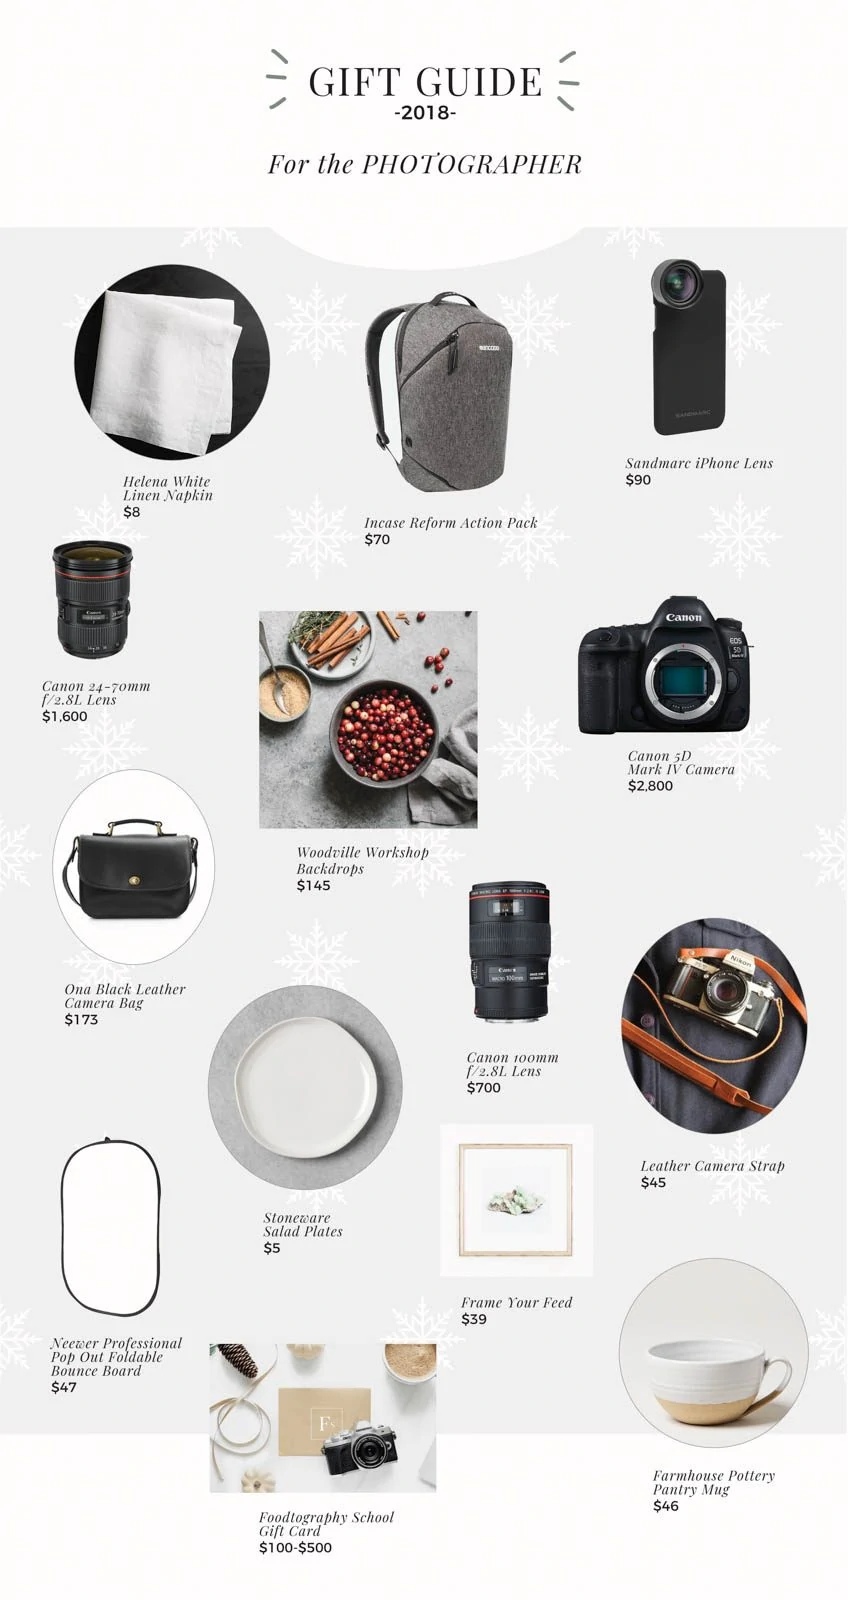 The 2018 Holiday Gift Guide: For the Photographer is perfect for the photo lover in your life, filled with cameras, lenses, props, and accessories!